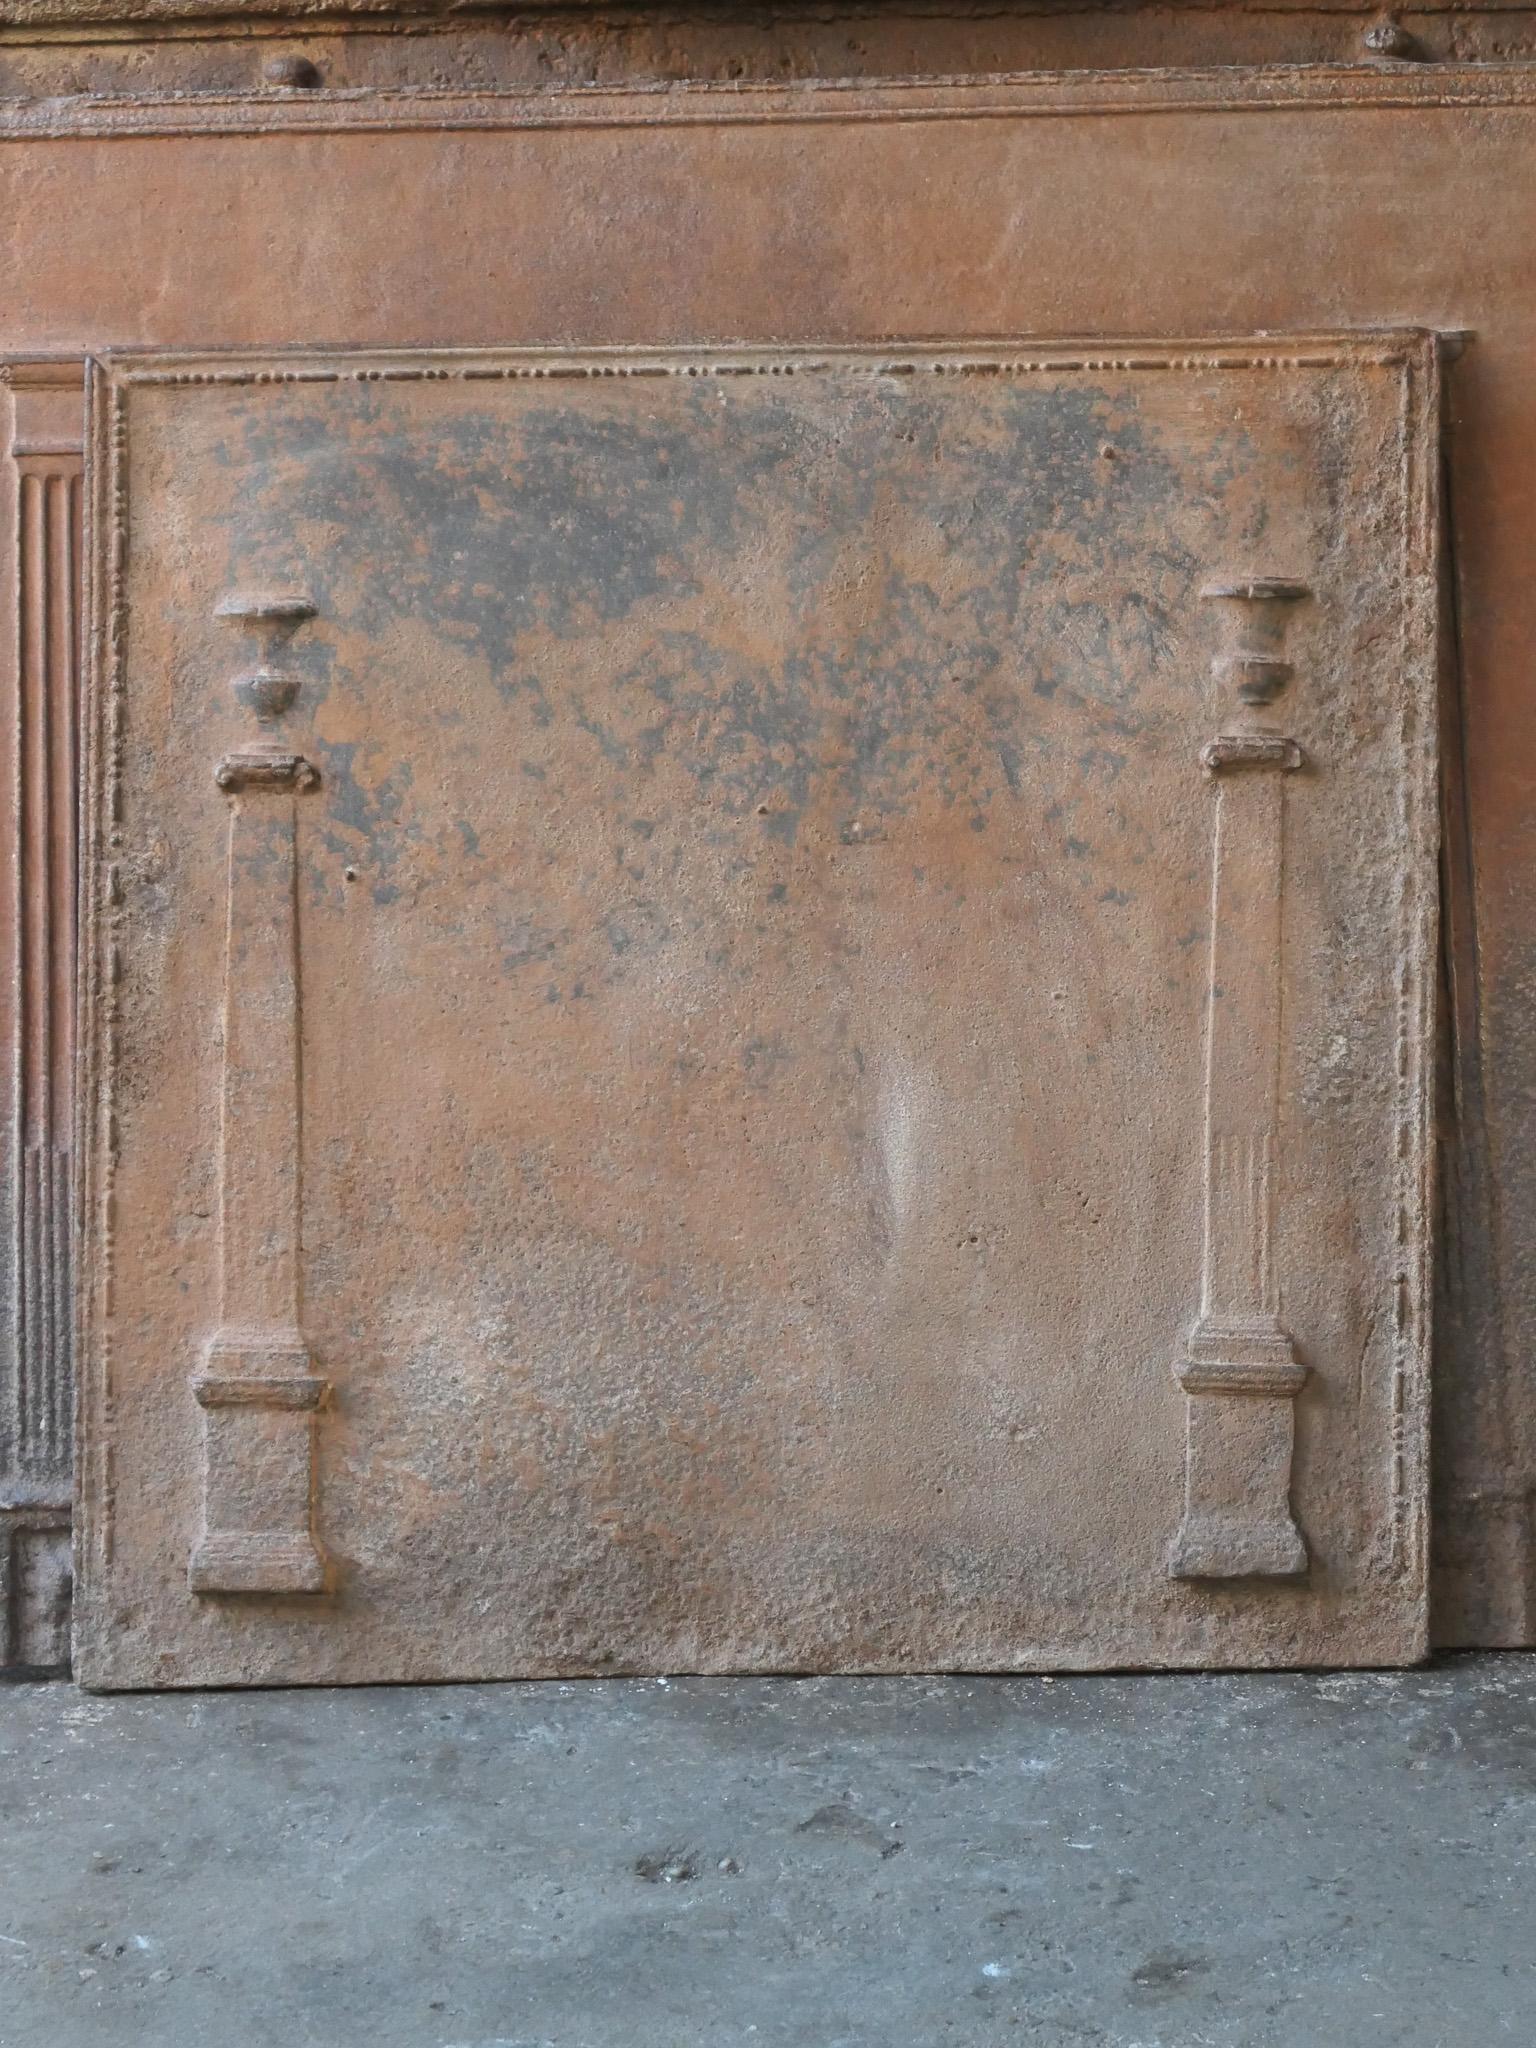 18th-19th century French neoclassical fireback with two pillars of freedom. The pillars symbolize the value liberty, one of the three values of the French revolution. 

The fireback is made of cast iron and has a natural brown patina. Upon request